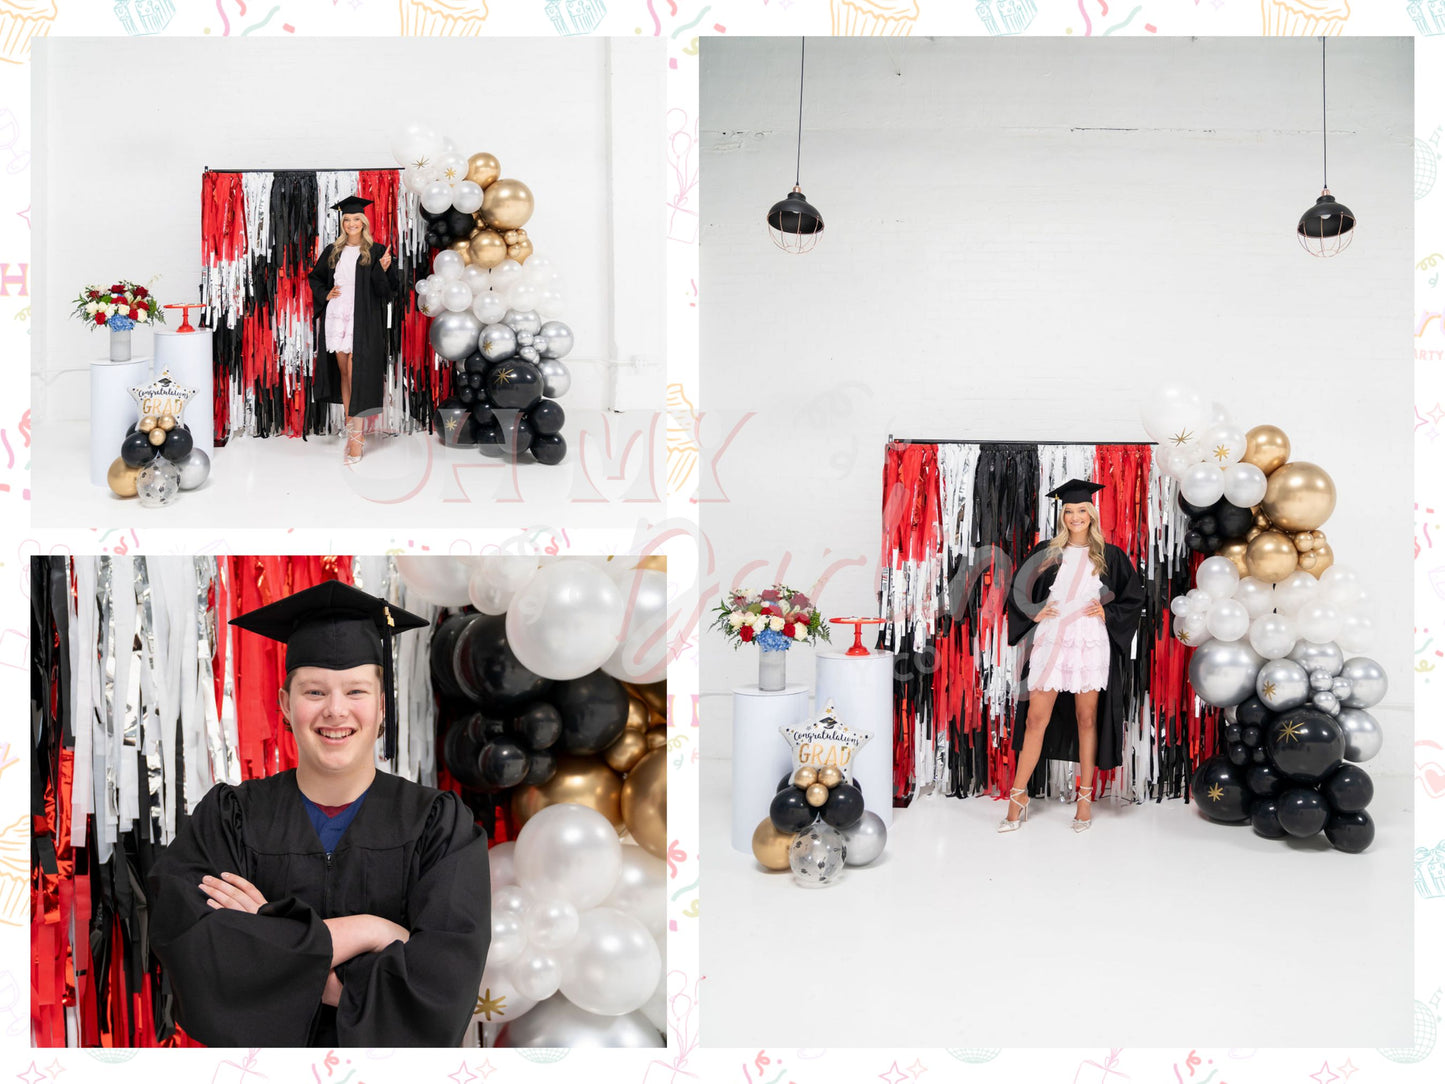 Classy Commencement Backdrop-Fringe Backdrop-Party Decor-Oh My Darling Party Co-Oh My Darling Party Co-backdrops for party, balloon garlands, Birthday Party, black, black and red, black and silver party, black and white, black backdrops, boy party, celebrate, college football, fringe backdrop, fringe garland, Fringe Streamers, girl party, graduation party, OMDPC, party backdrops, party decor, party supplies, pirate, pirates, premium, red, red and black, Red and White, RED BACKDROP, tassels, texas tech, TTU,